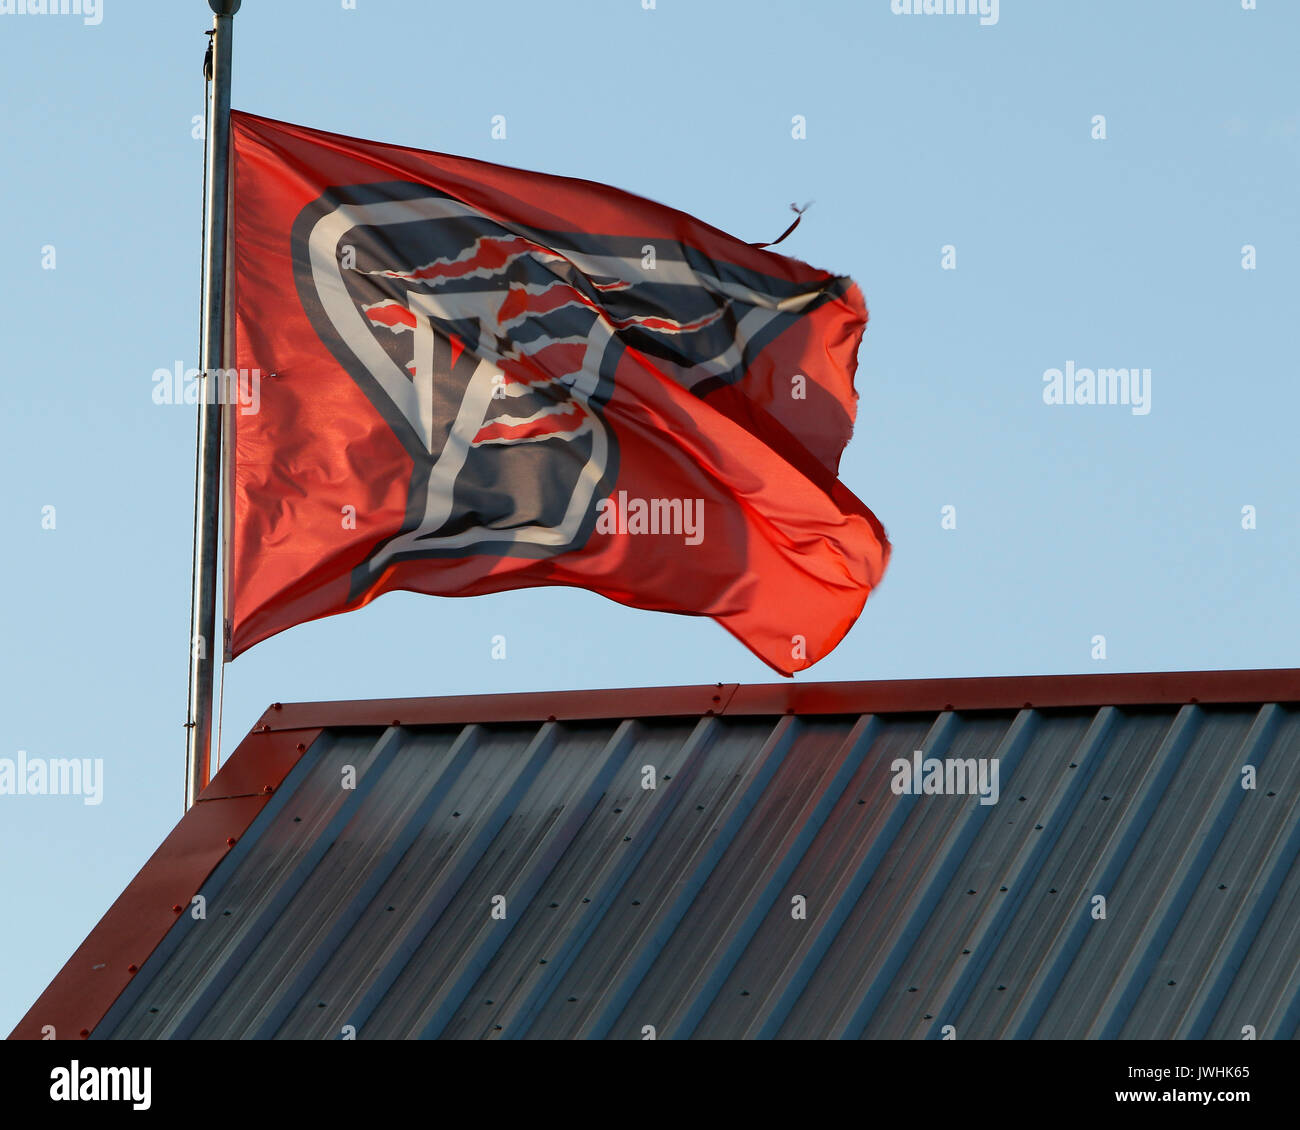 Glasgow, Scotland, UK. 12th August, 2017. Flying the flag for the Tigers over Ashfield Stadium Credit: Colin Poultney/Alamy Live News Stock Photo